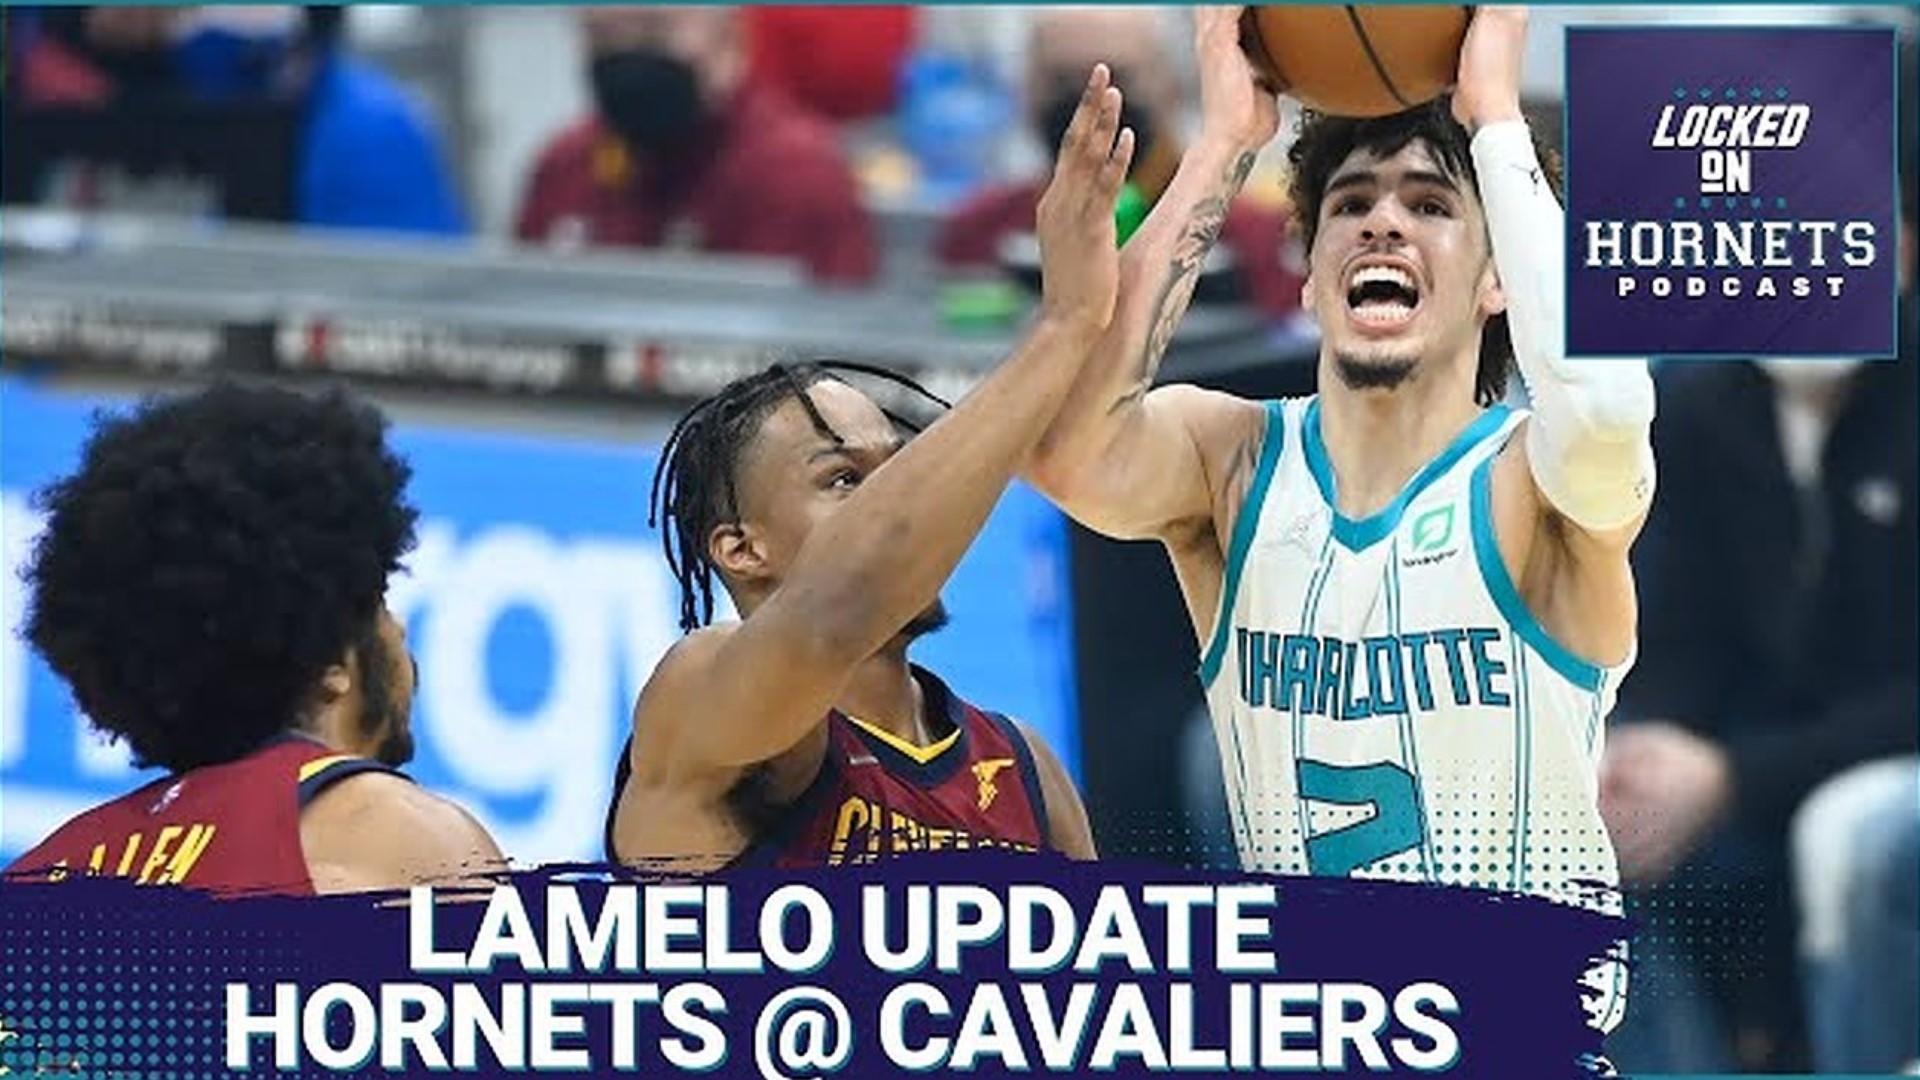 Nick Carboni from WCNC joins the show to discuss LaMelo Ball's negative X-Ray and what it means for the player and the team.